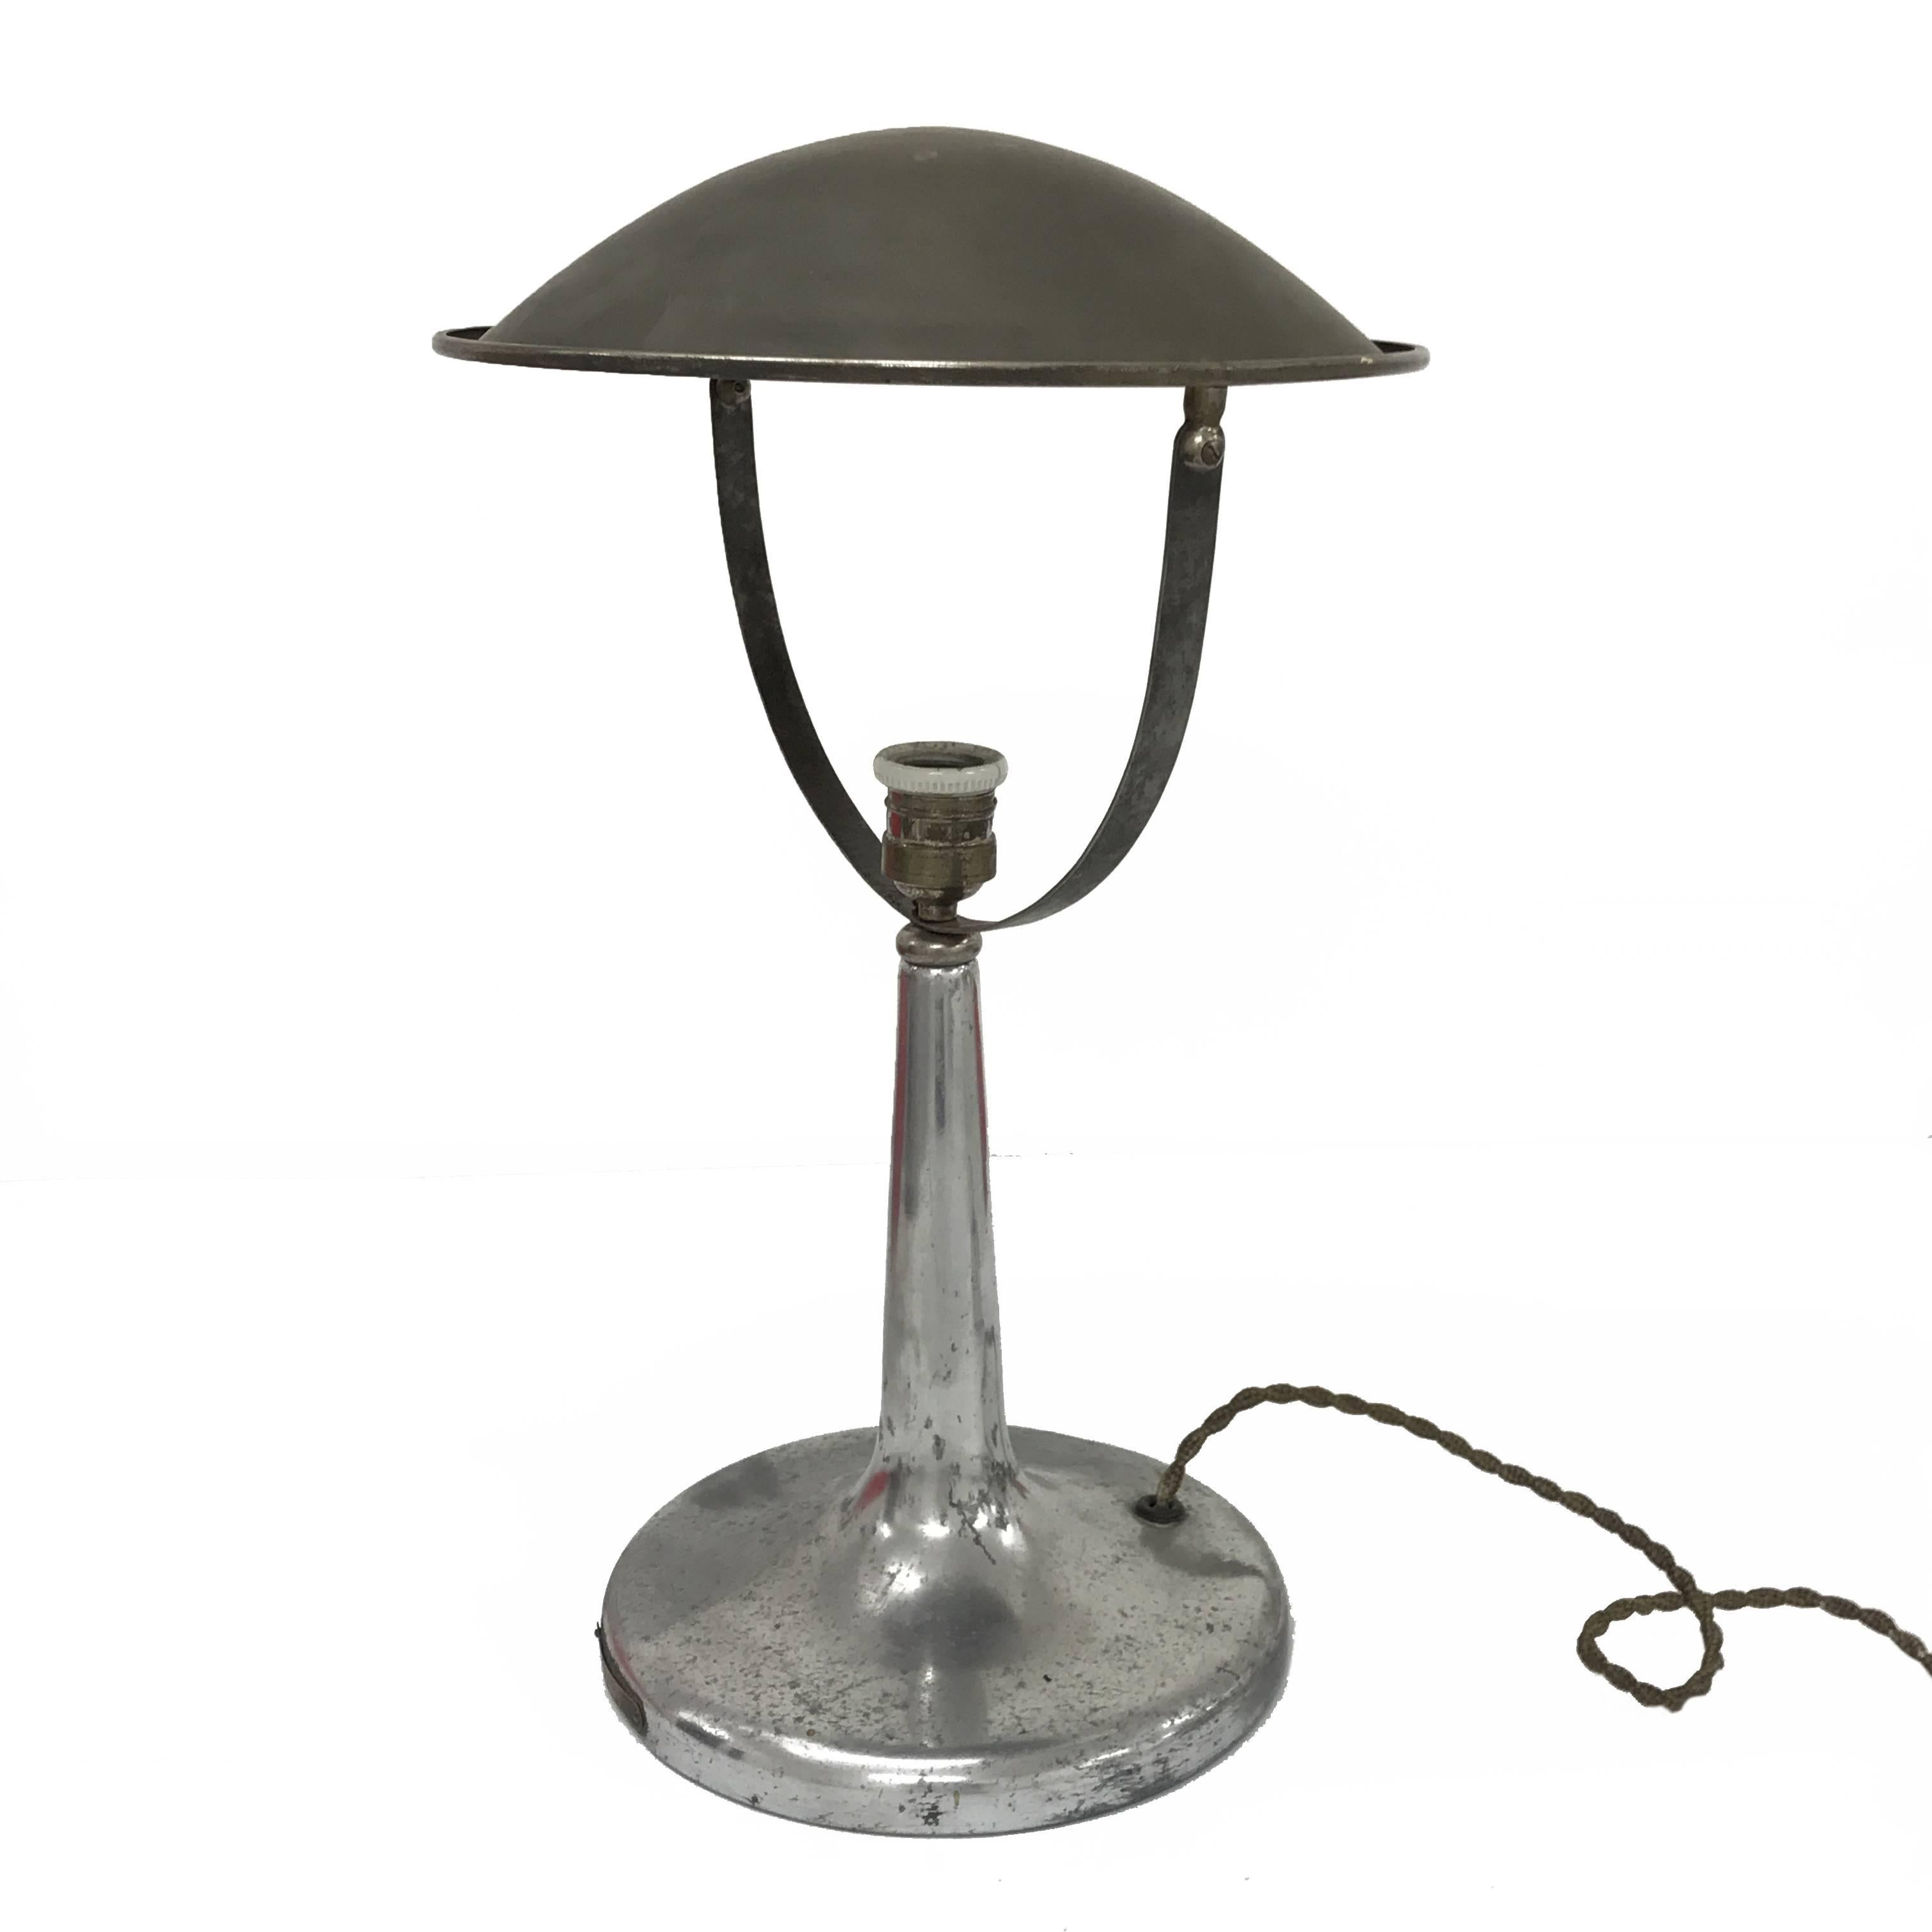 Amazing midcentury adjustable table lamp, the 1940s. This fantastic item was designed by Gardoncini for Zerowatt in Italy during the 1940s.

This item is made of green and pure metal and has an adjustable both in height and inclination round